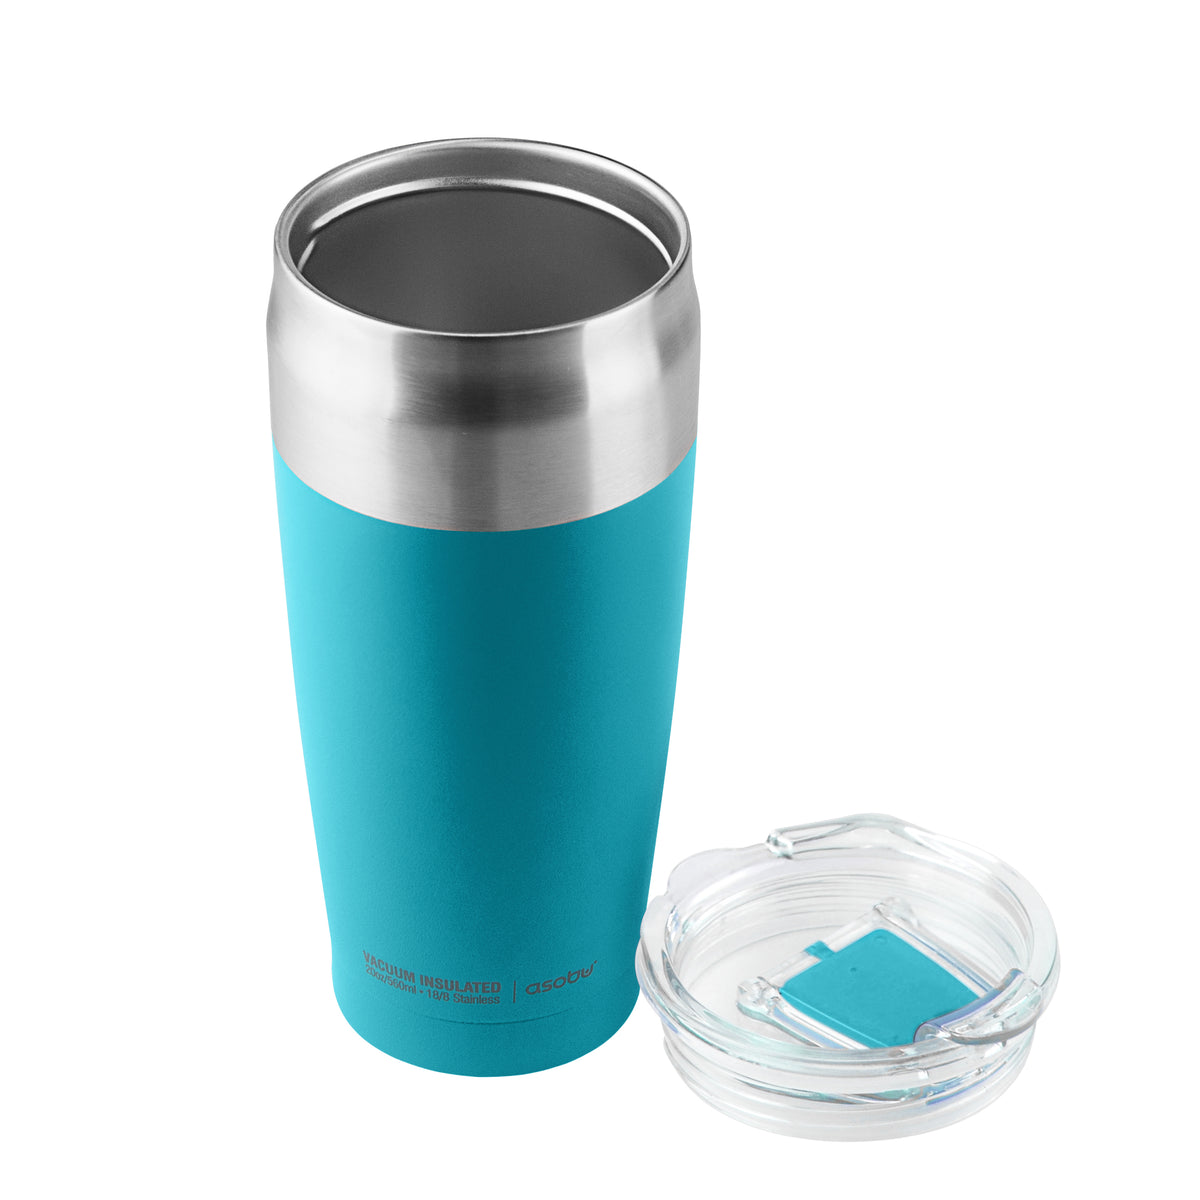 Tied Tumbler - Spill Proof Coffee Tumbler - Food Safe & 100% BPA